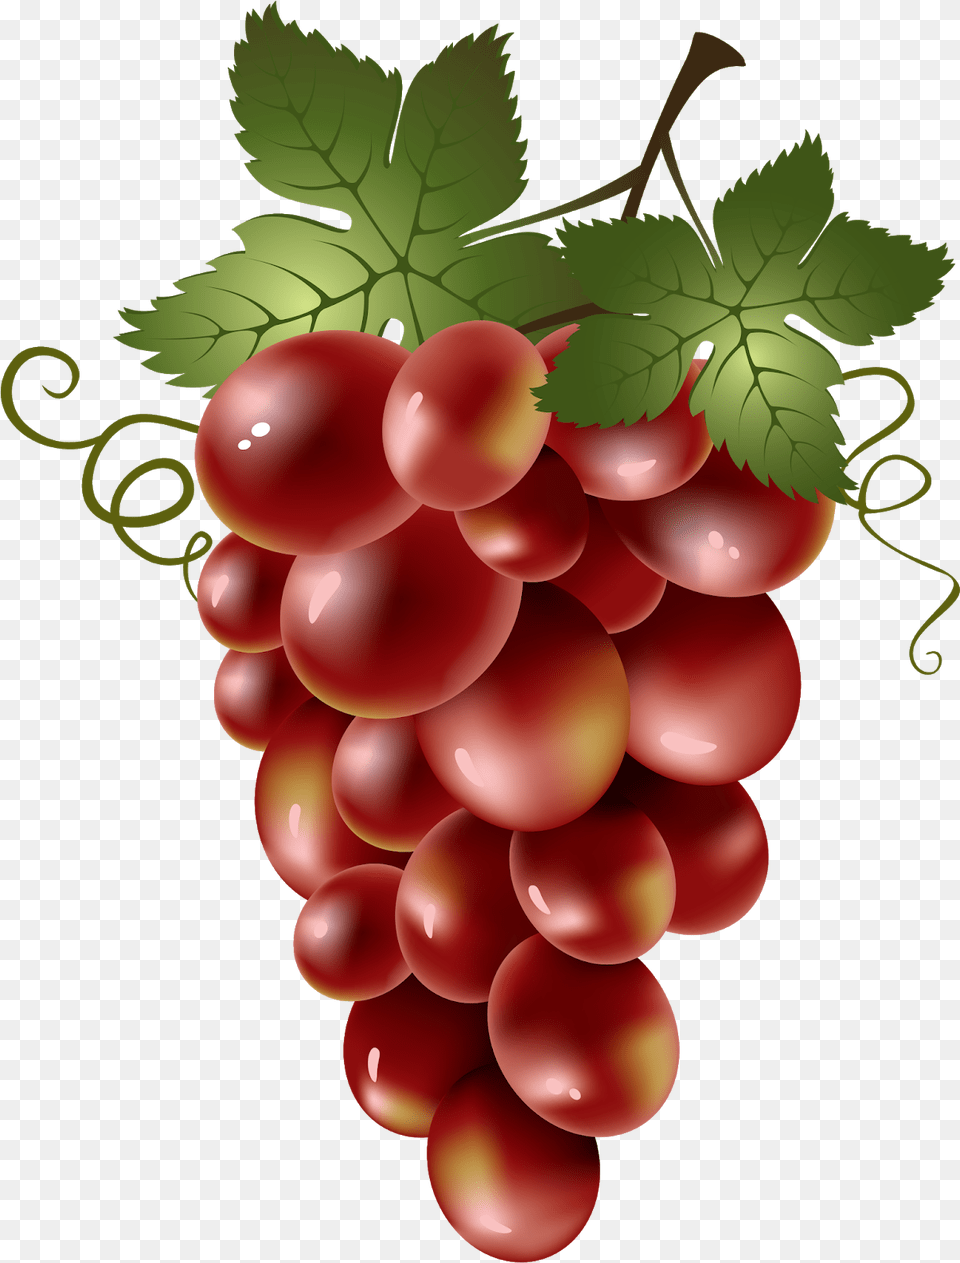 Grapes Images, Food, Fruit, Plant, Produce Png